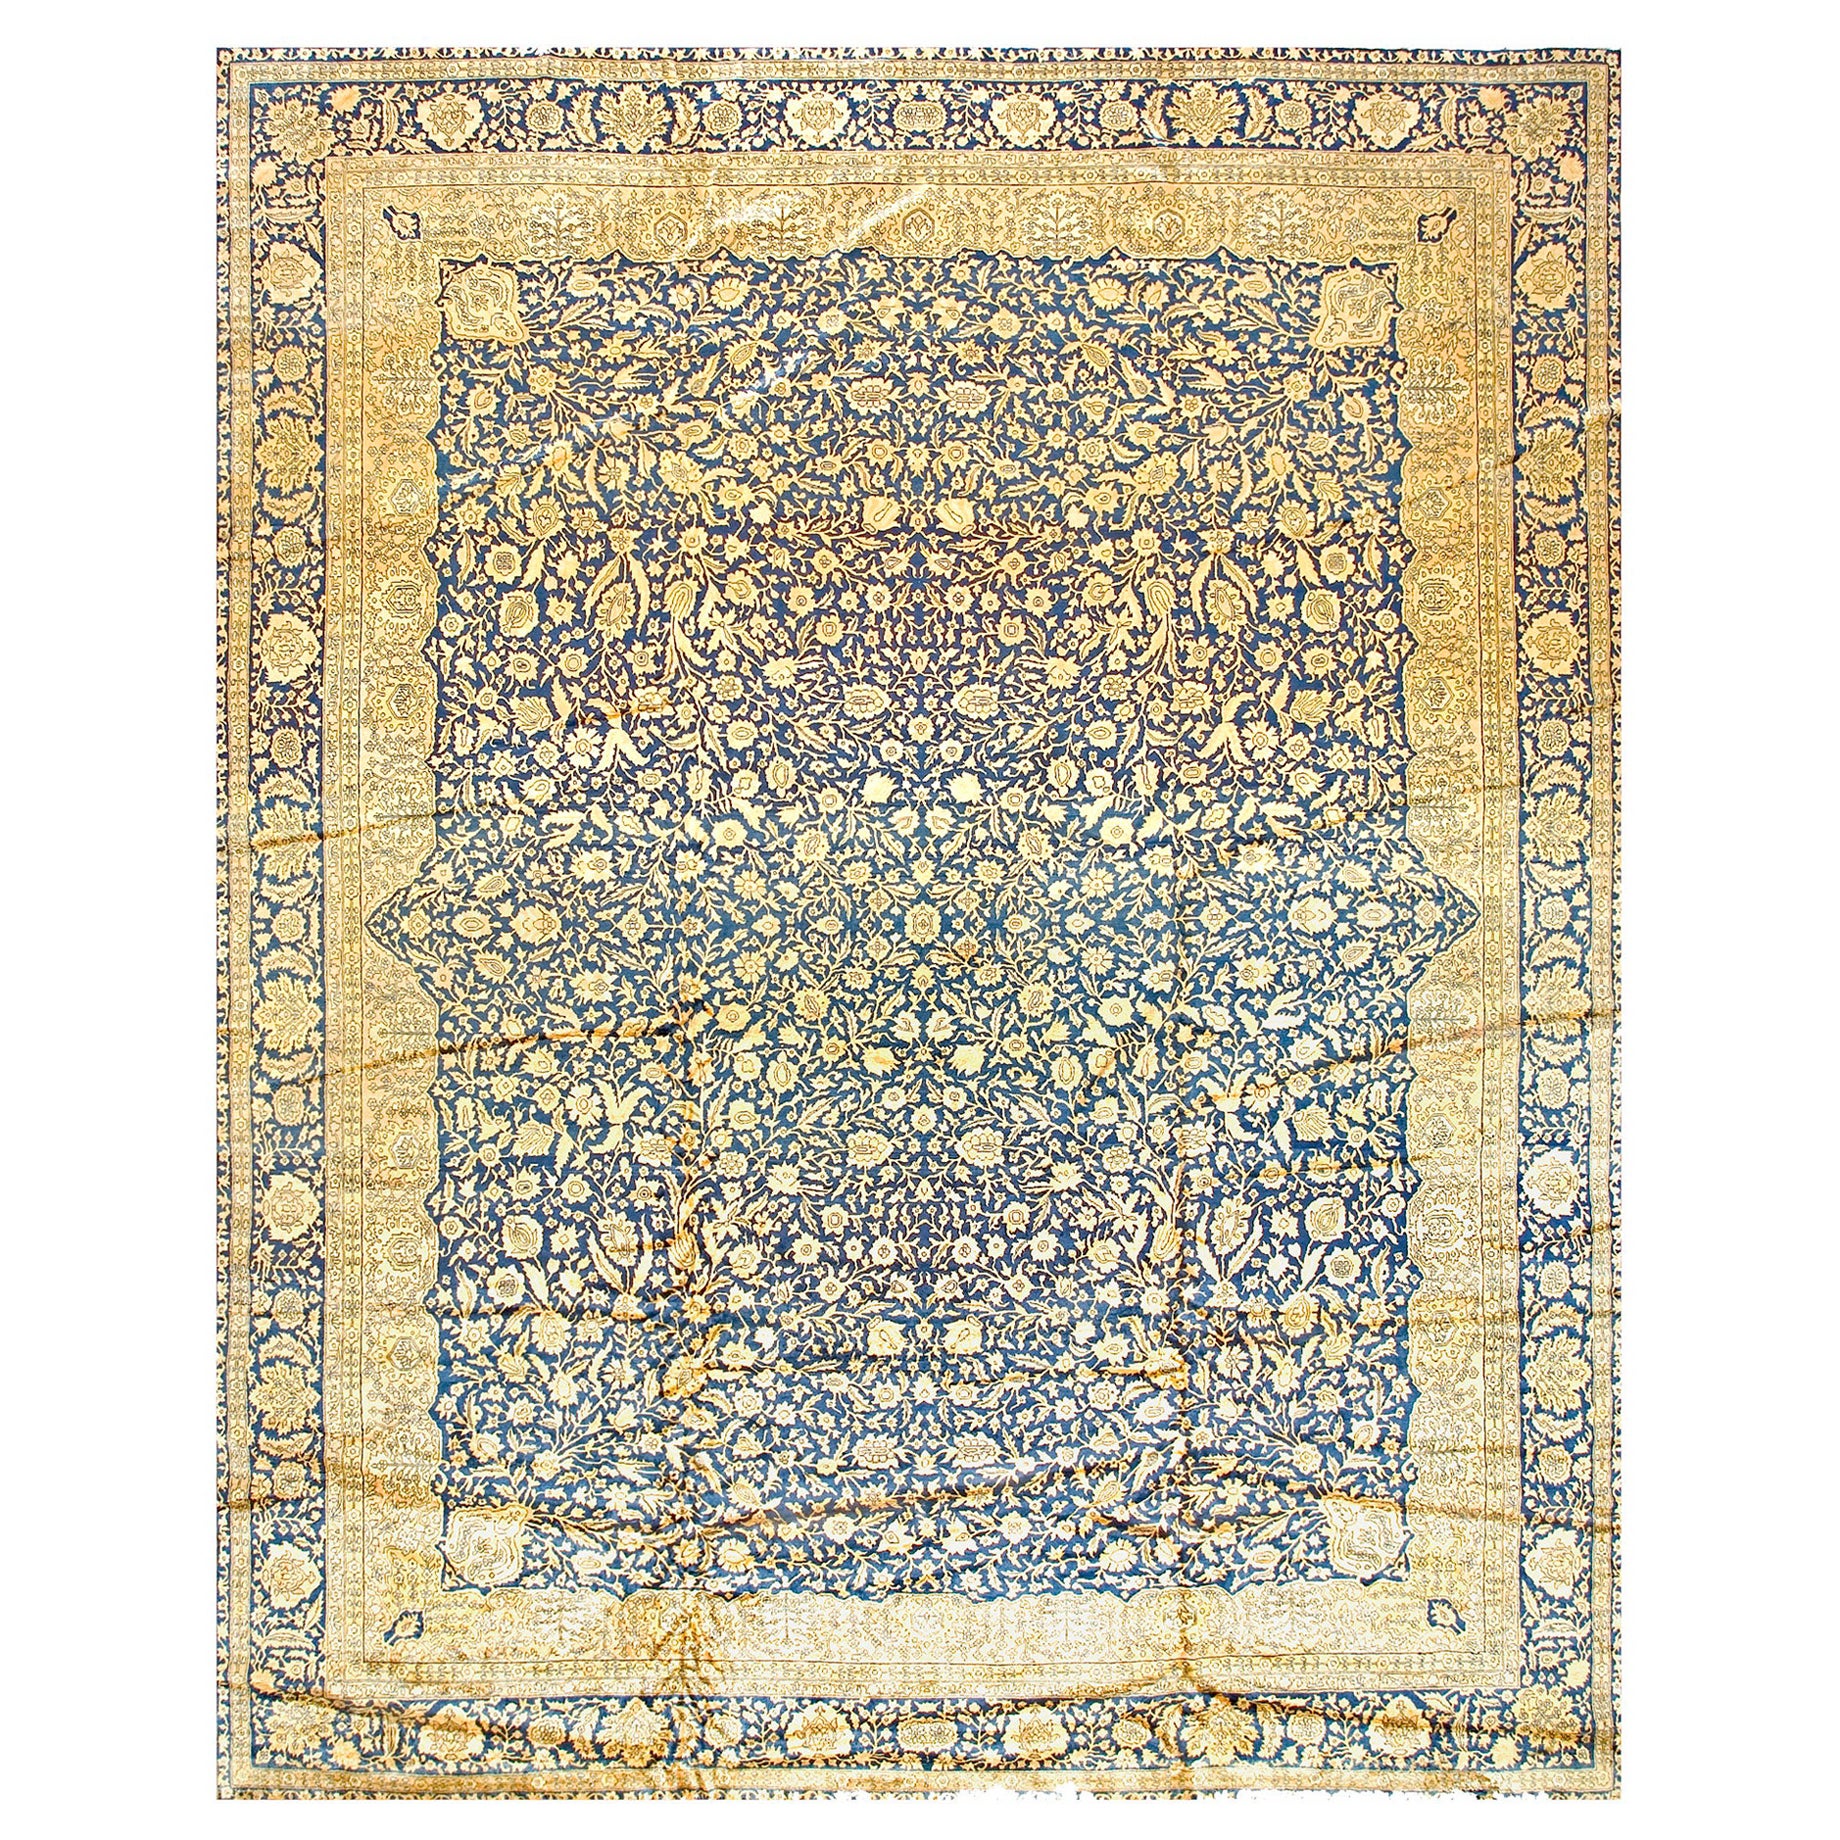 Early 20th Century Indian Lahore Carpet ( 12' x 15'3'' - 365 x 465 )